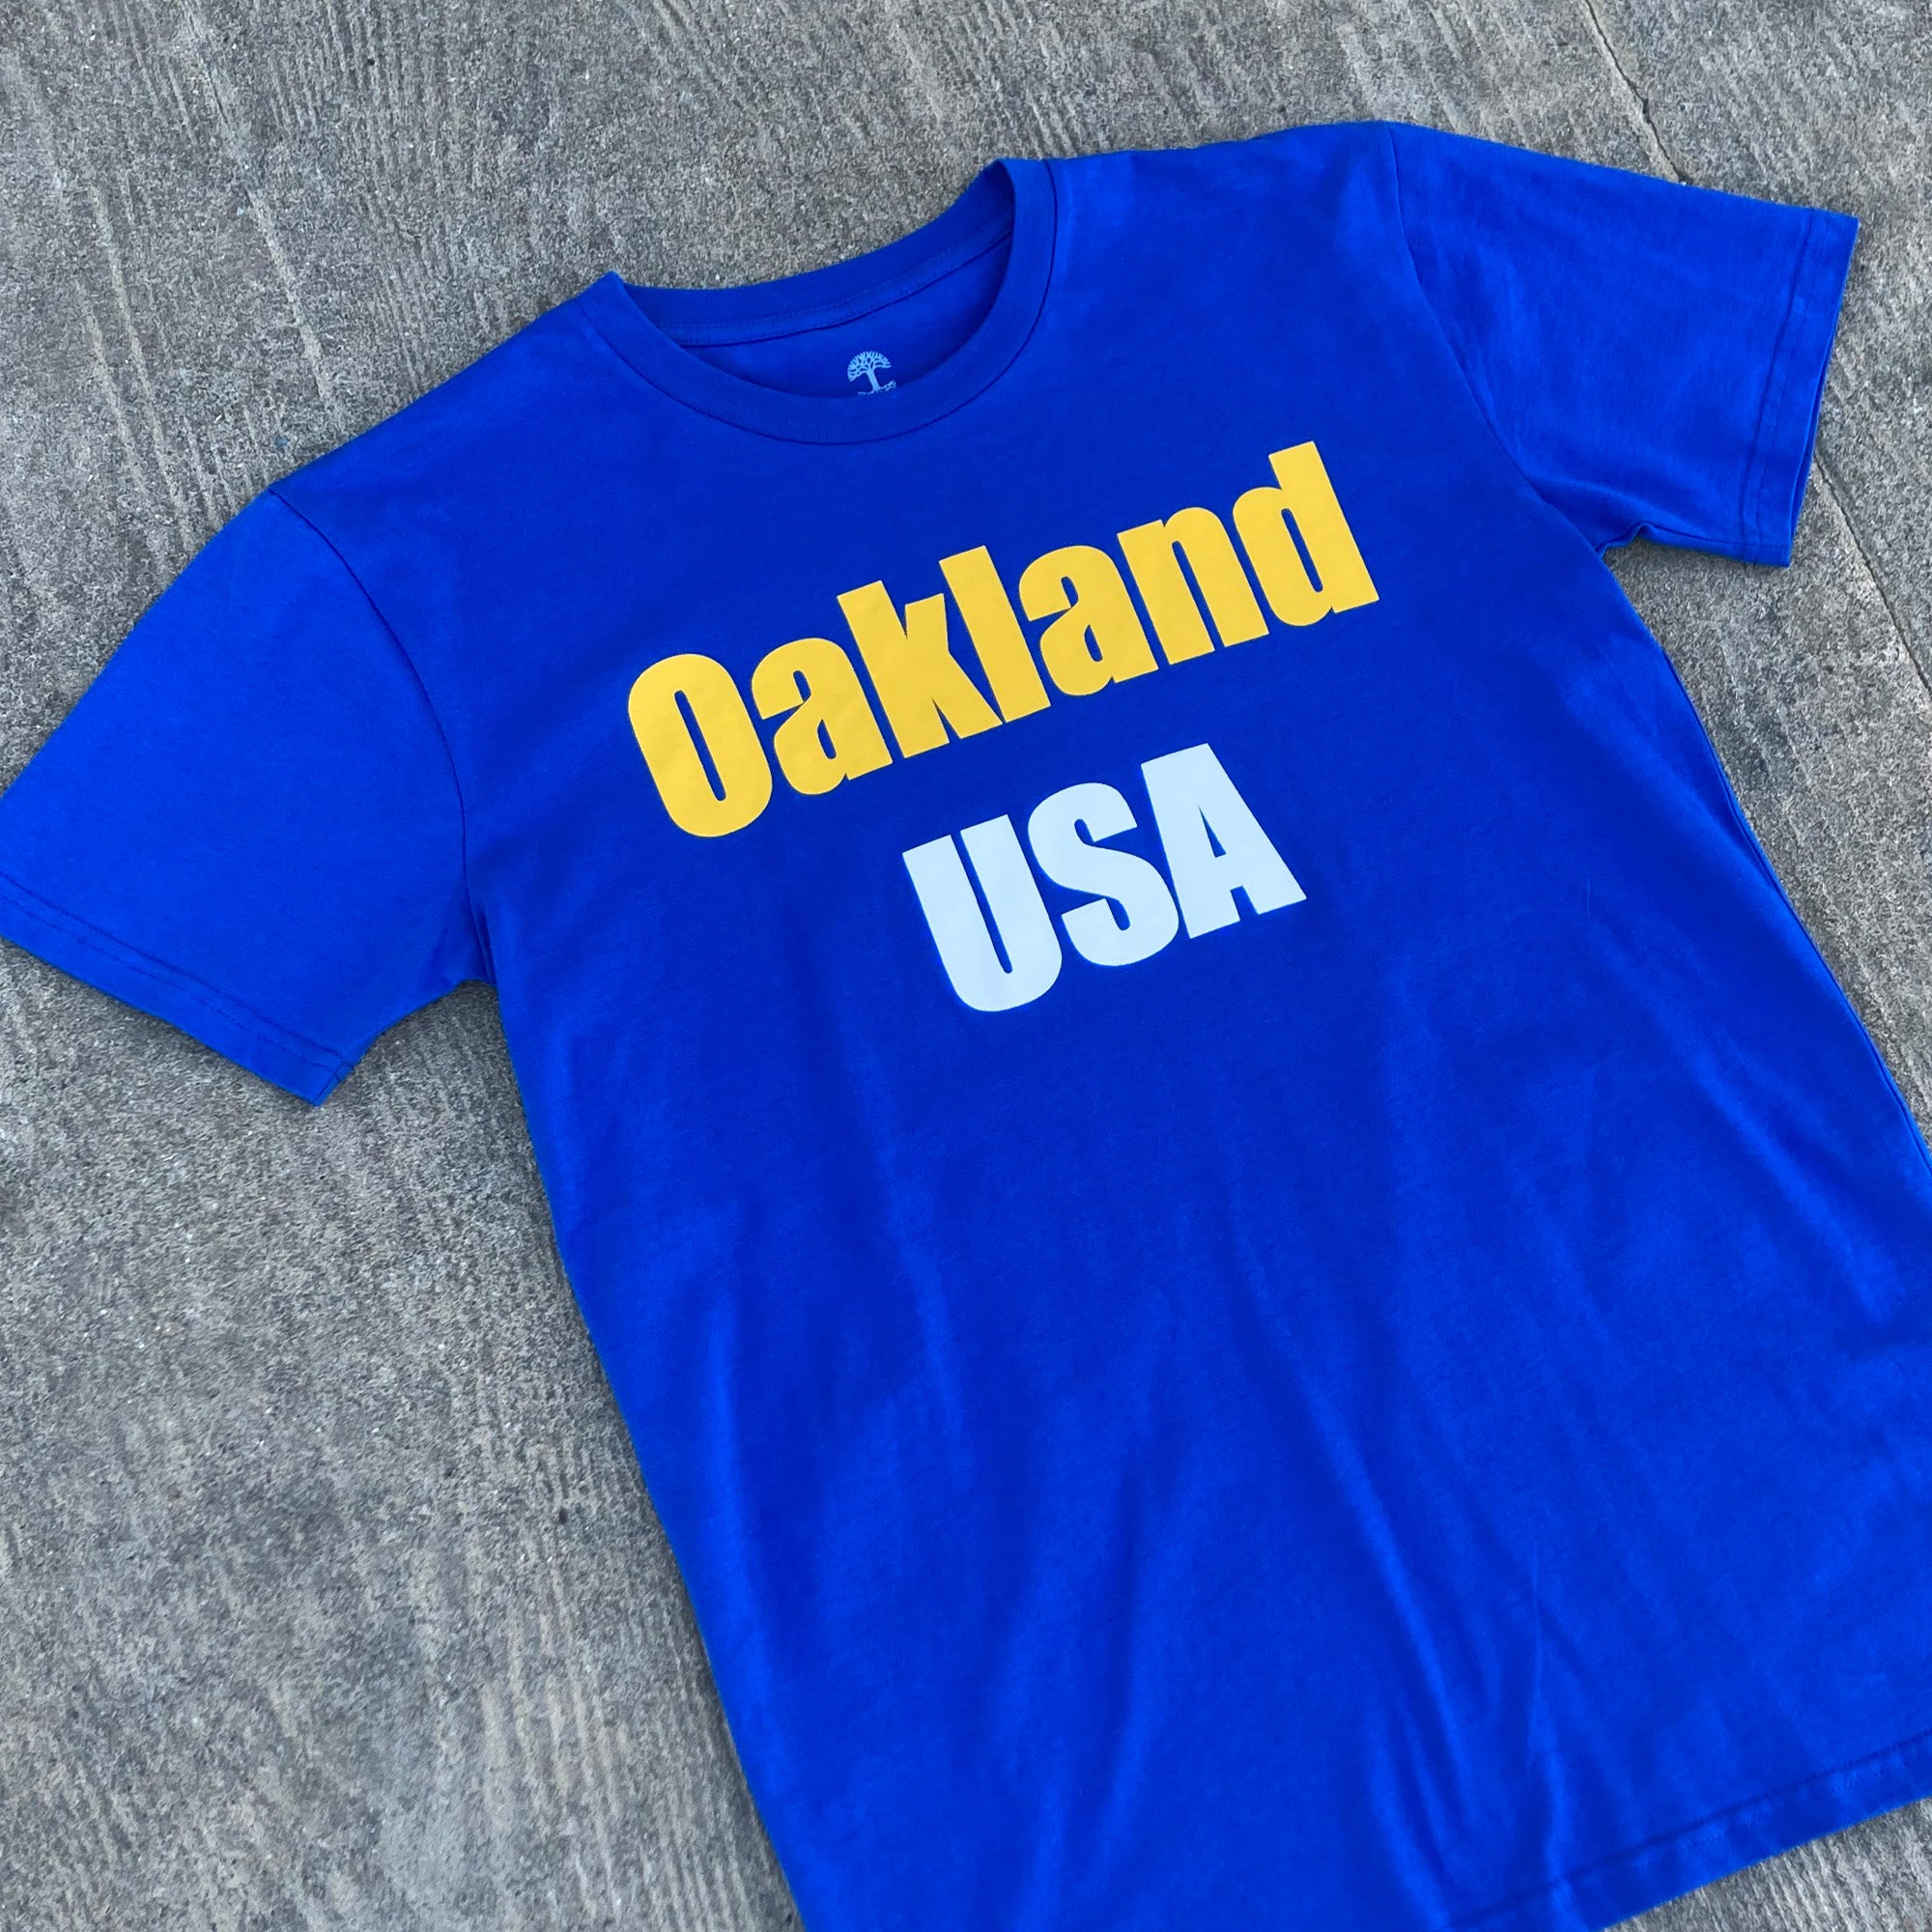 Image of Royal t-shirt with 'Oakland USA' wordmark outside on wood surface.